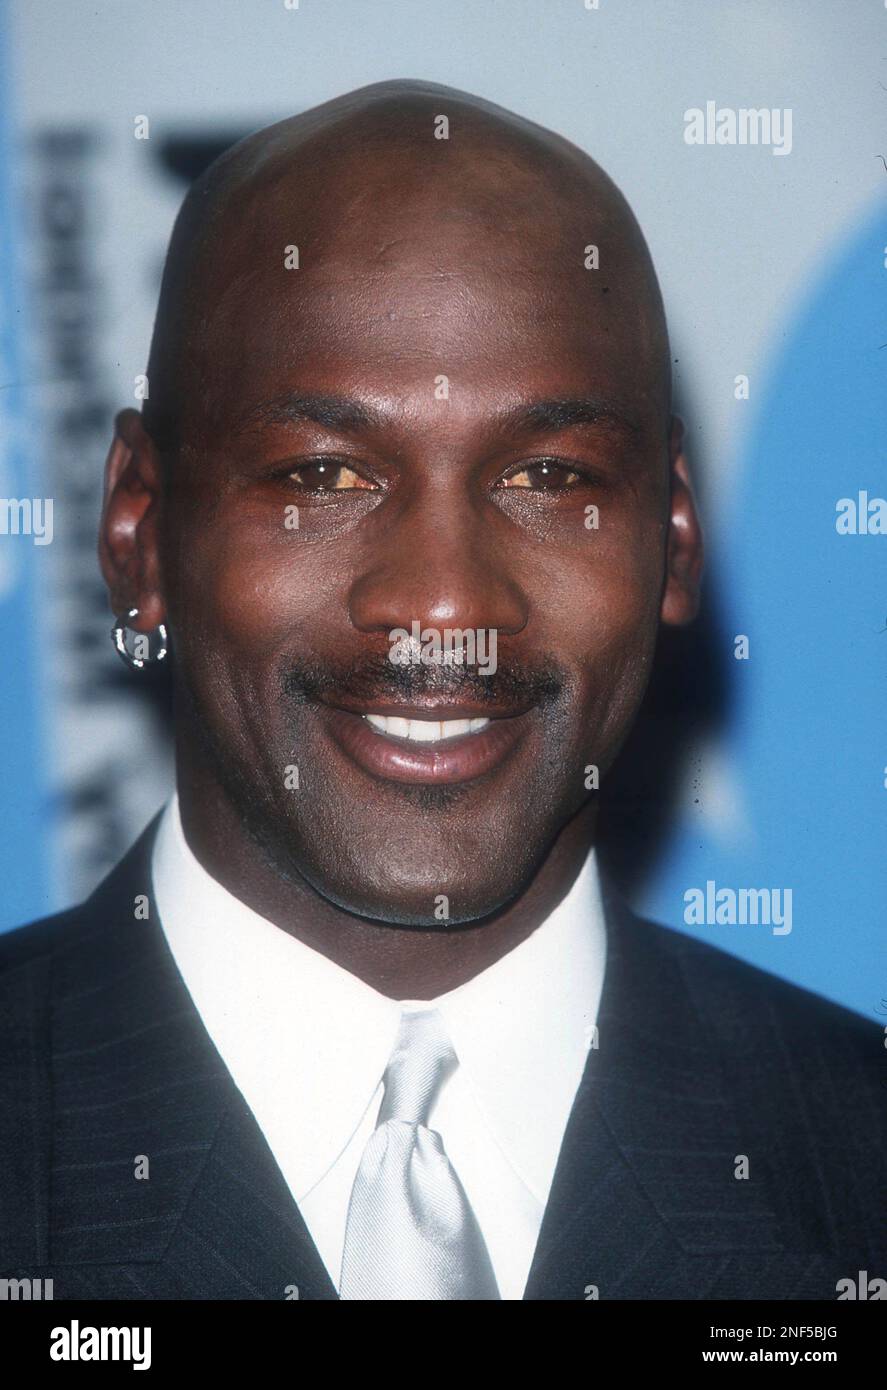 FEBRUARY 15th 2023 NBA legend Michael Jordan donates ten million dollars to the Make-A-Wish Foundation in honor of his 60th birthday